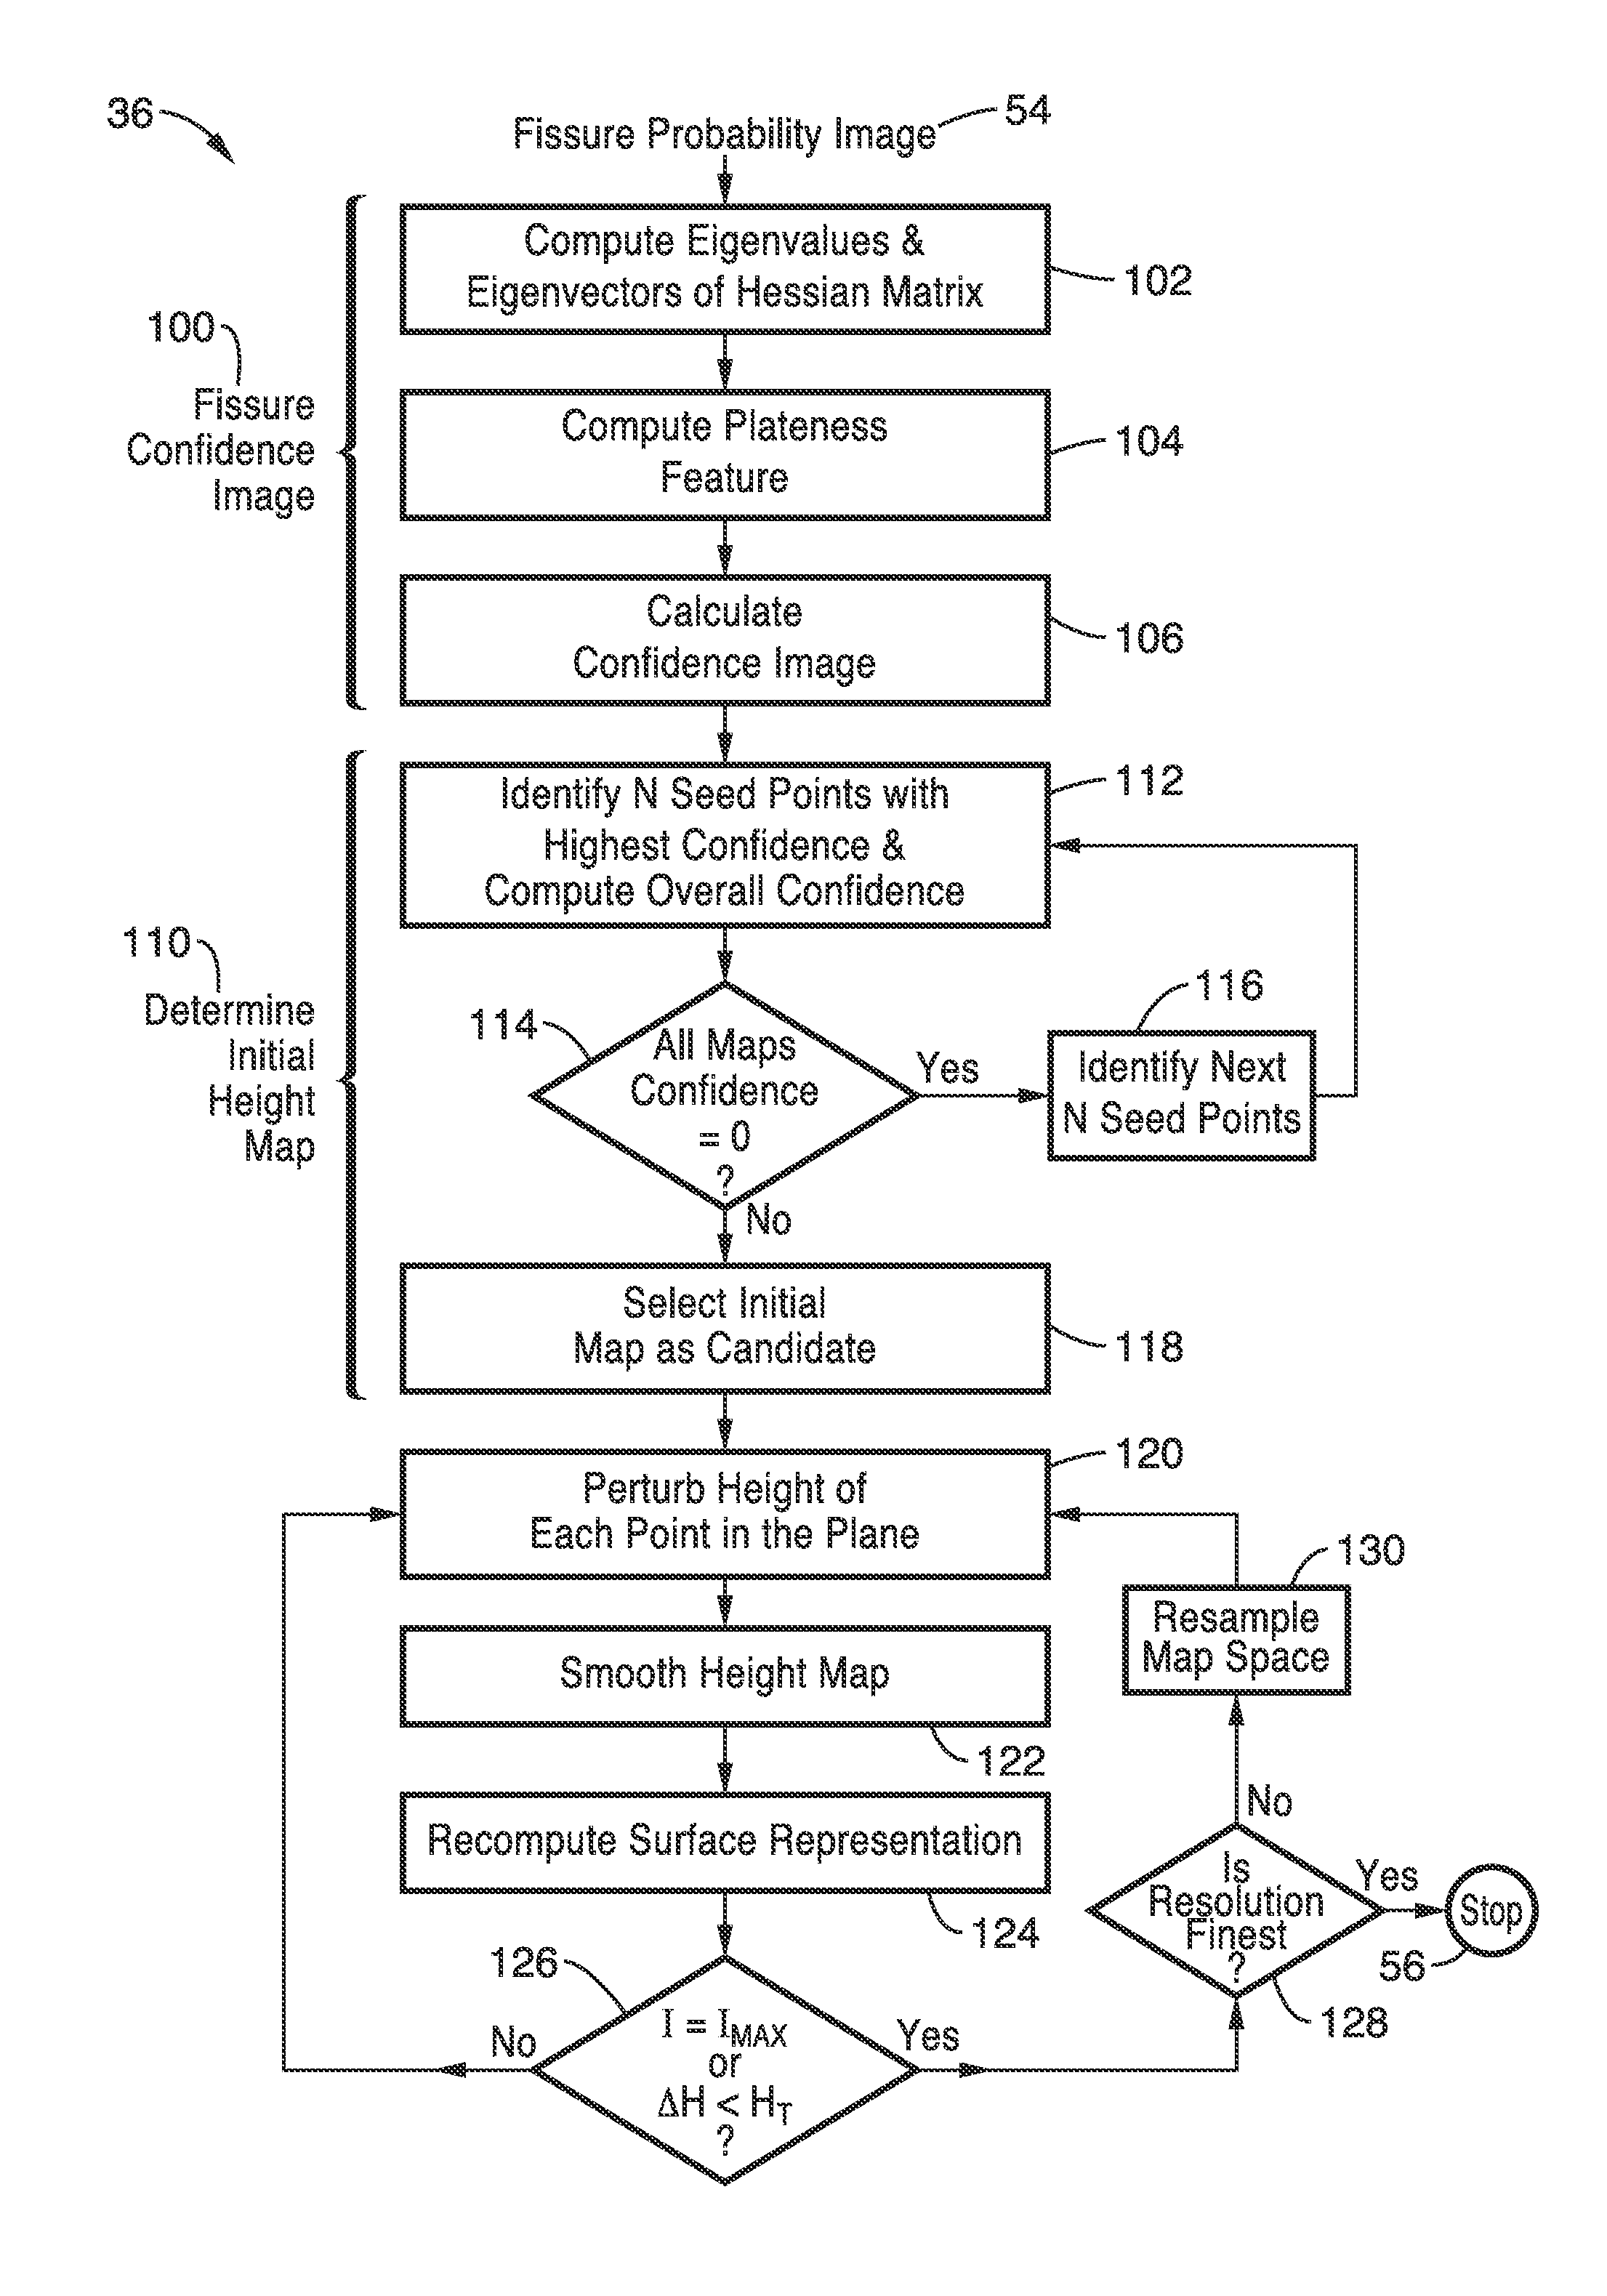 Lung, lobe, and fissure imaging systems and methods